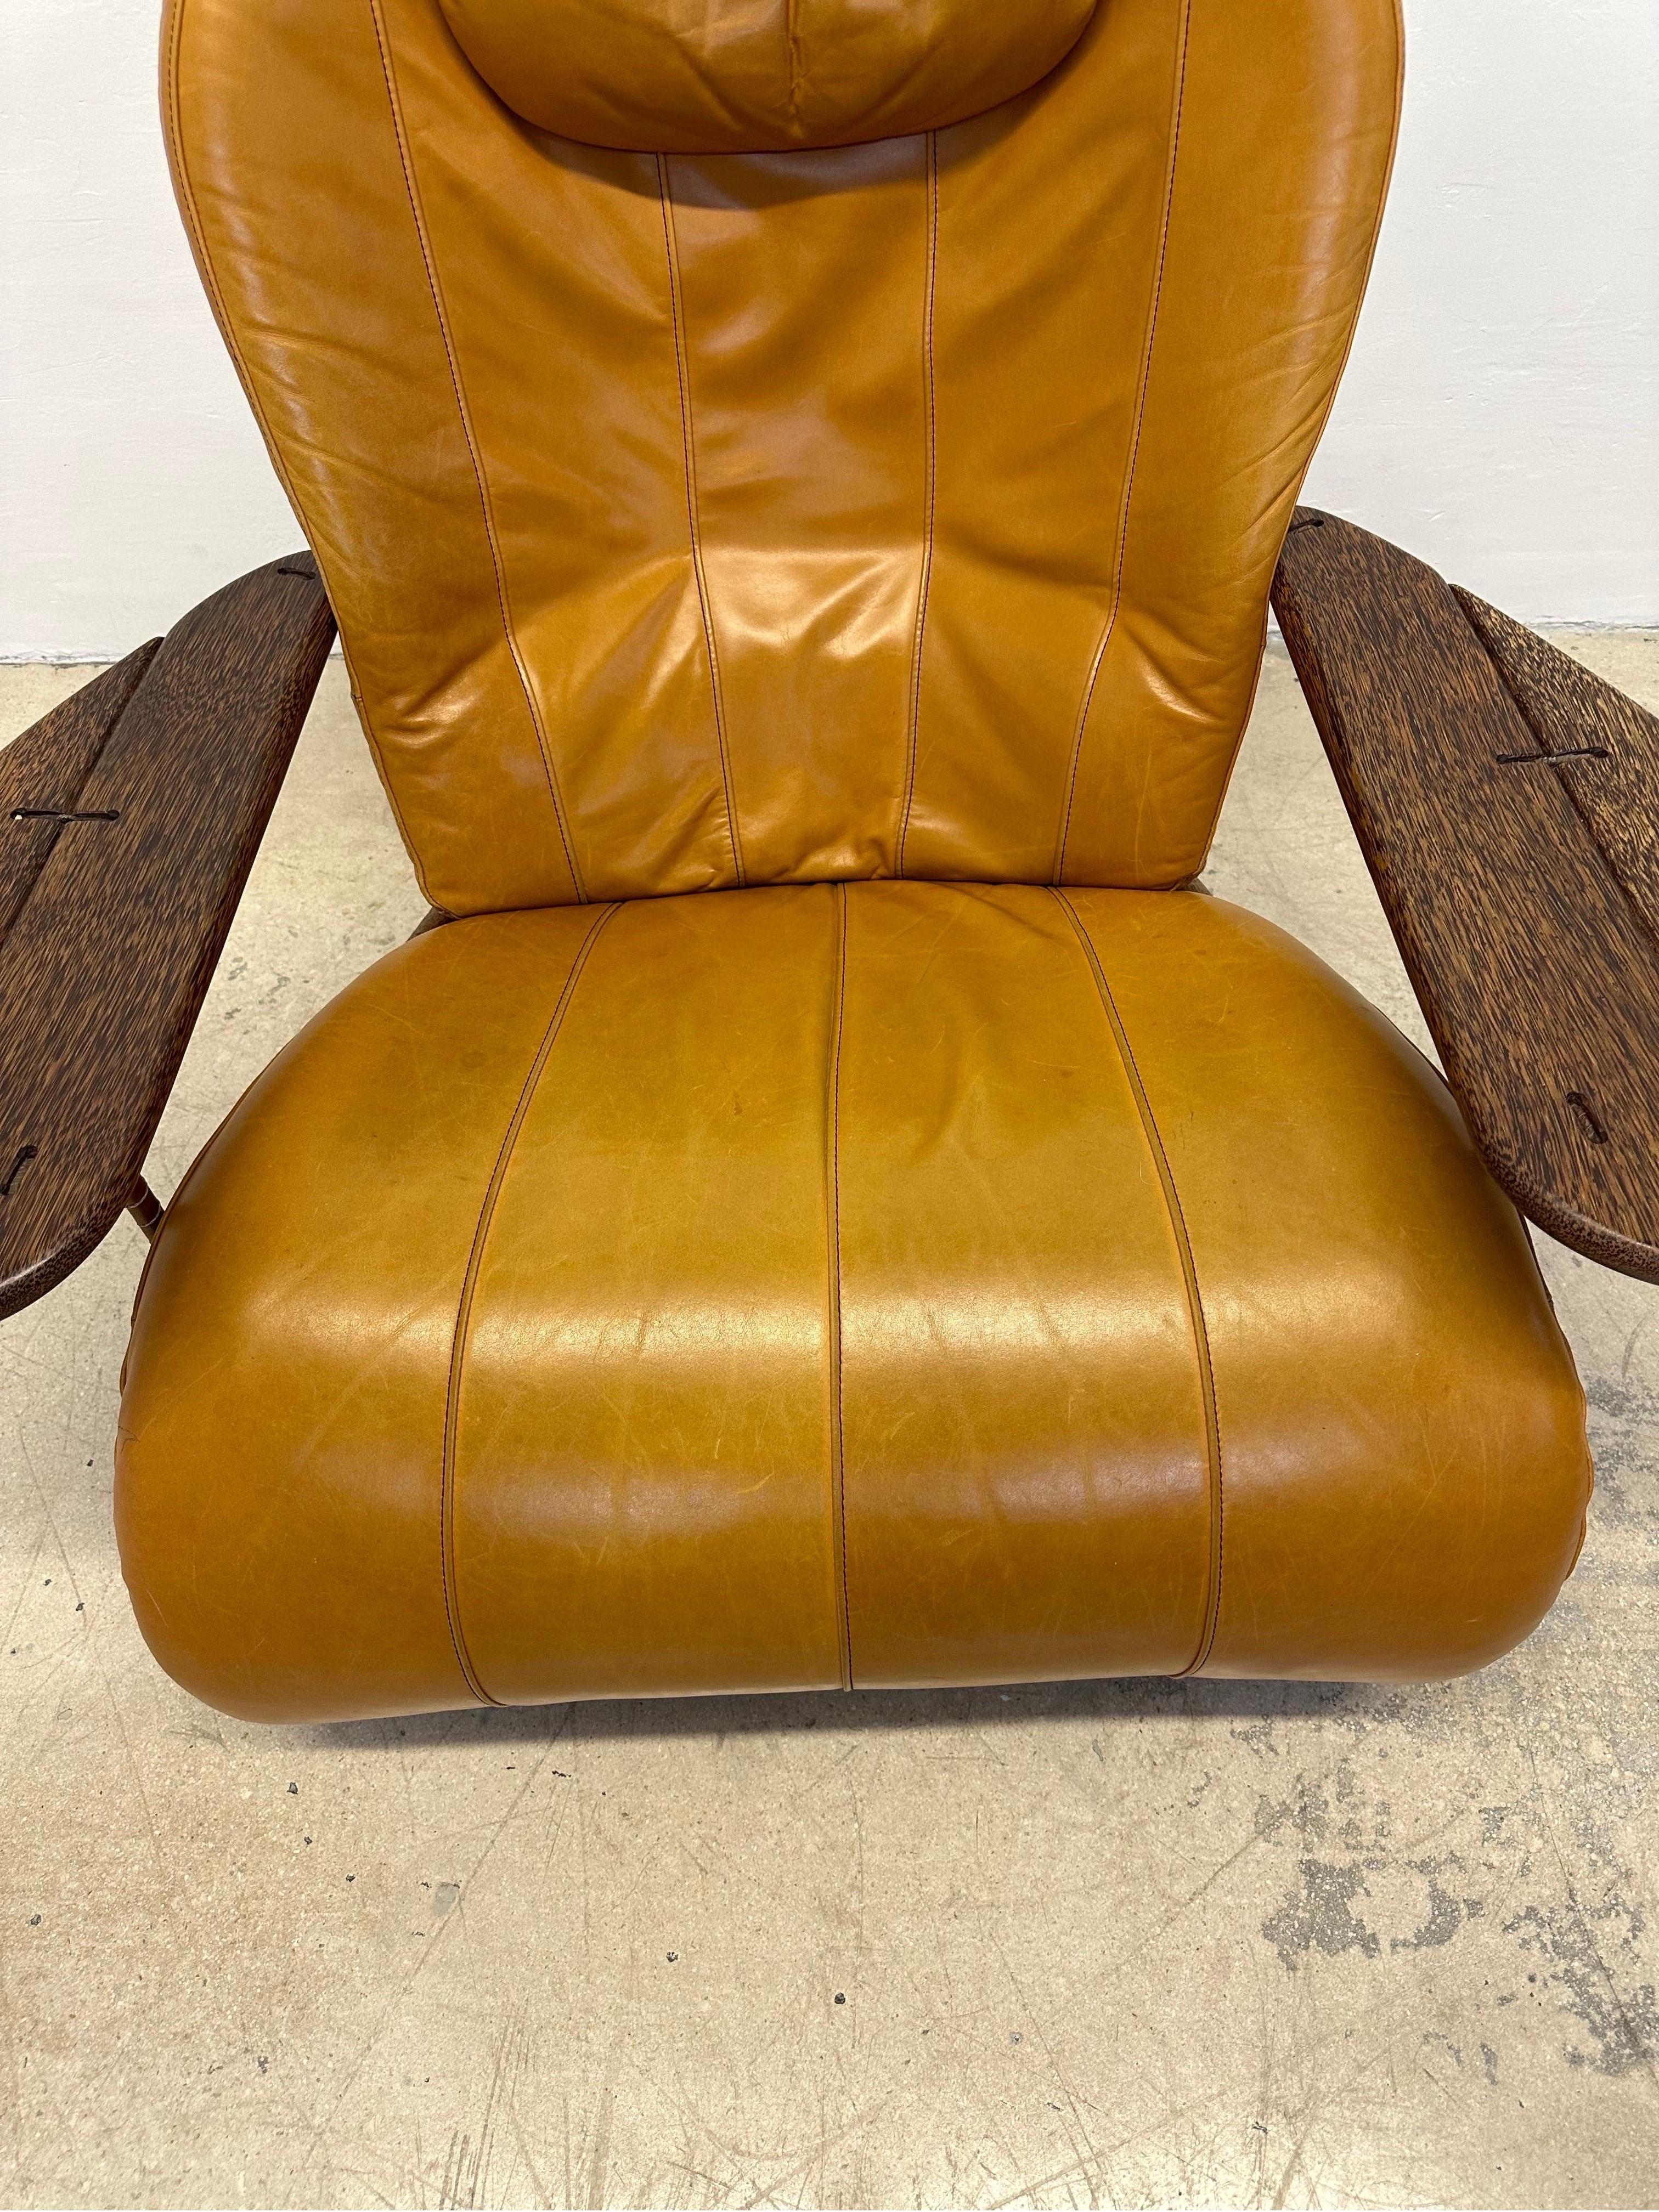 Pacific Green Havana Palmwood and Leather Lounge Chair For Sale 3